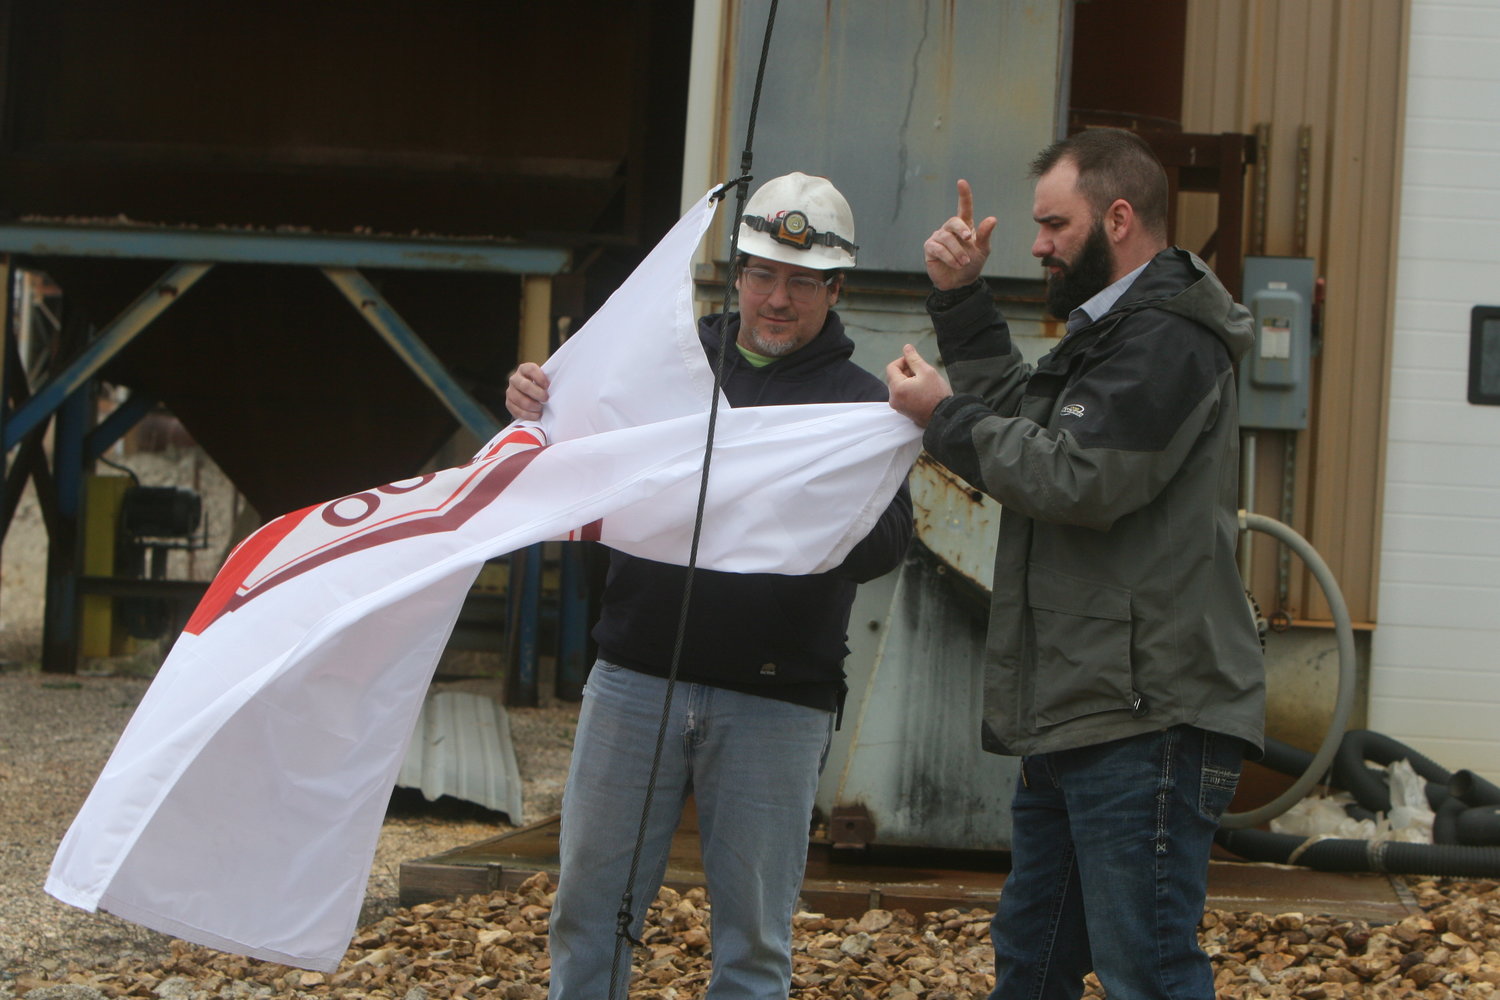 Eddie Rose, assistant manager of the Christy Minerals plant in High Hill, and military representative Steve Lomelino work on raising the Christy Minerals’ 100th anniversary flag on April 20.